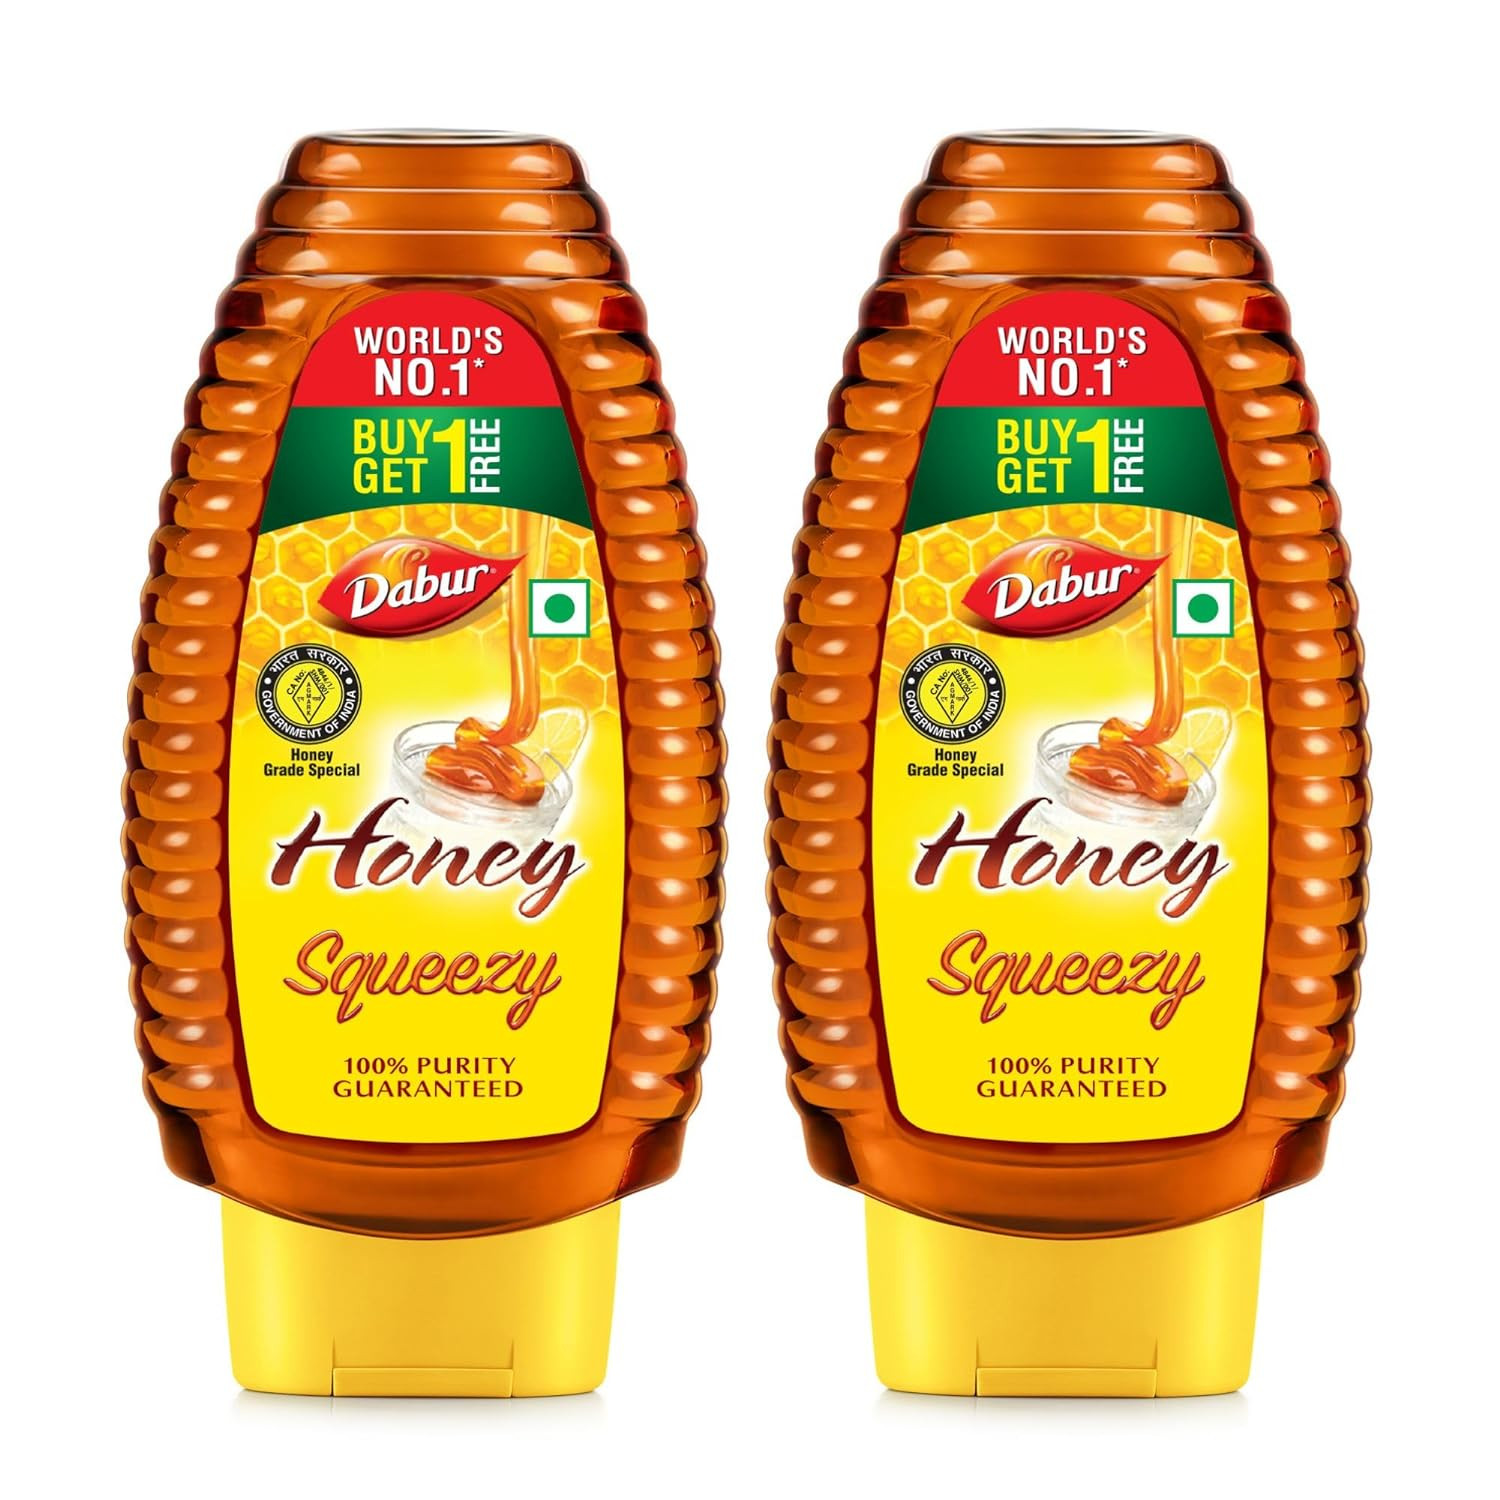 Dabur Honey Squeezy Pack – 450g (225g x 2, Pack of 2) | 100% Pure | World's No.1 Honey Brand with No Sugar Adulteration